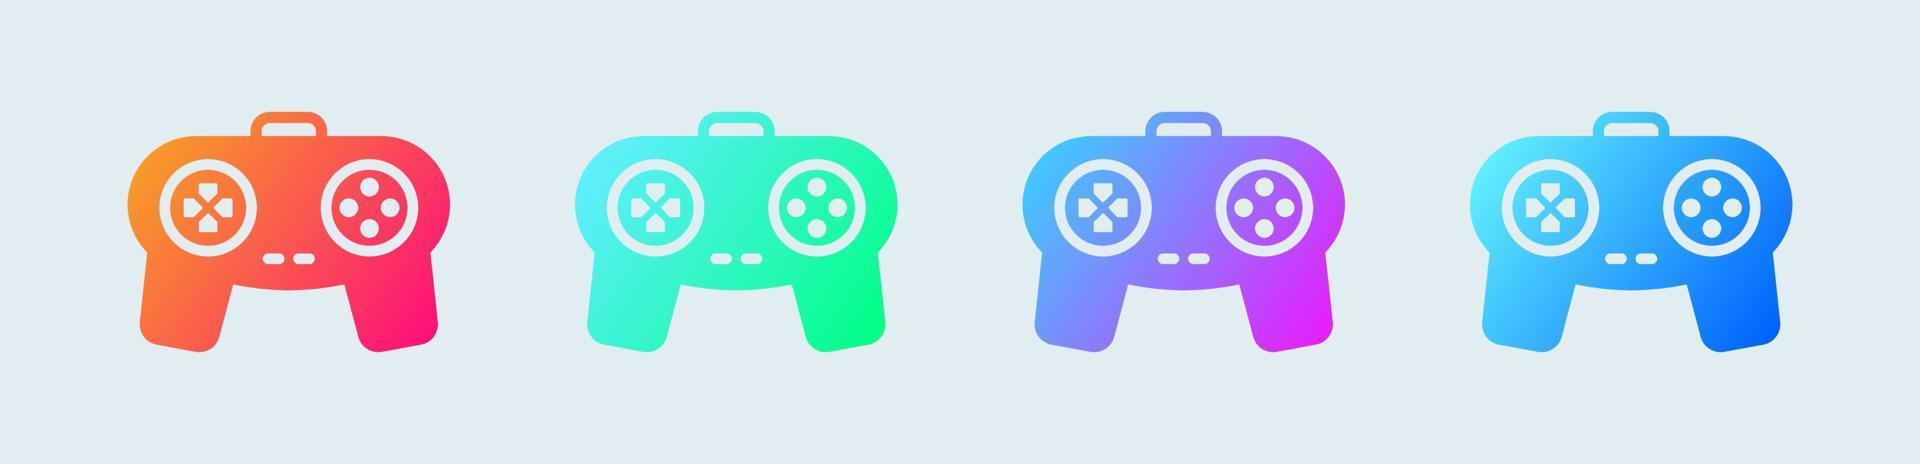 Joystick solid icon in gradient colors. Game console sign vector illustration.